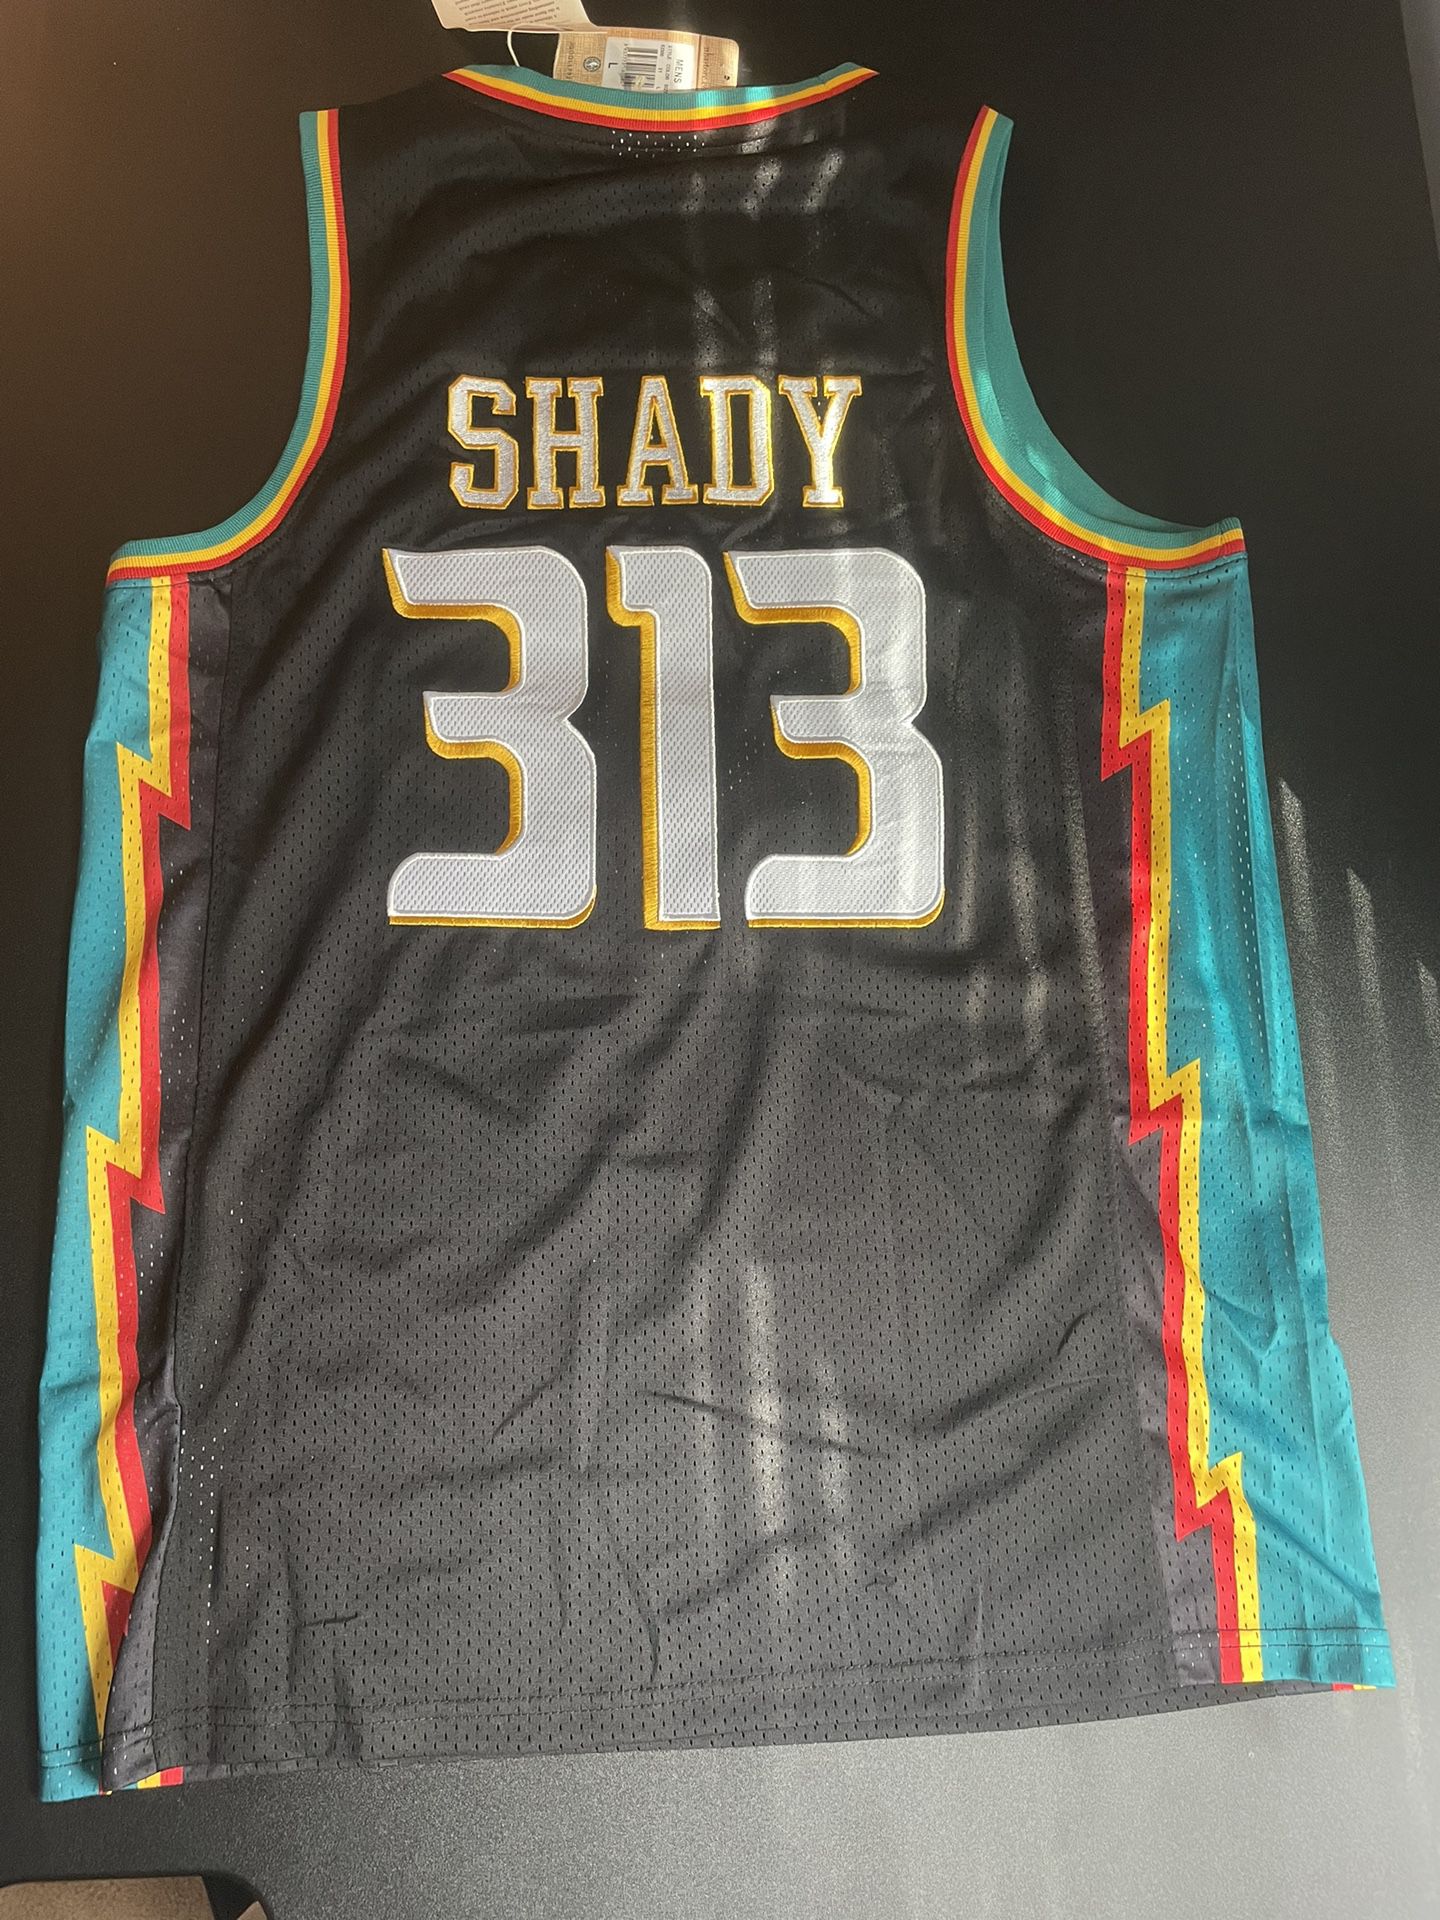 Detroit Pistons Slim Shady Jersey for Sale in Houston, TX - OfferUp